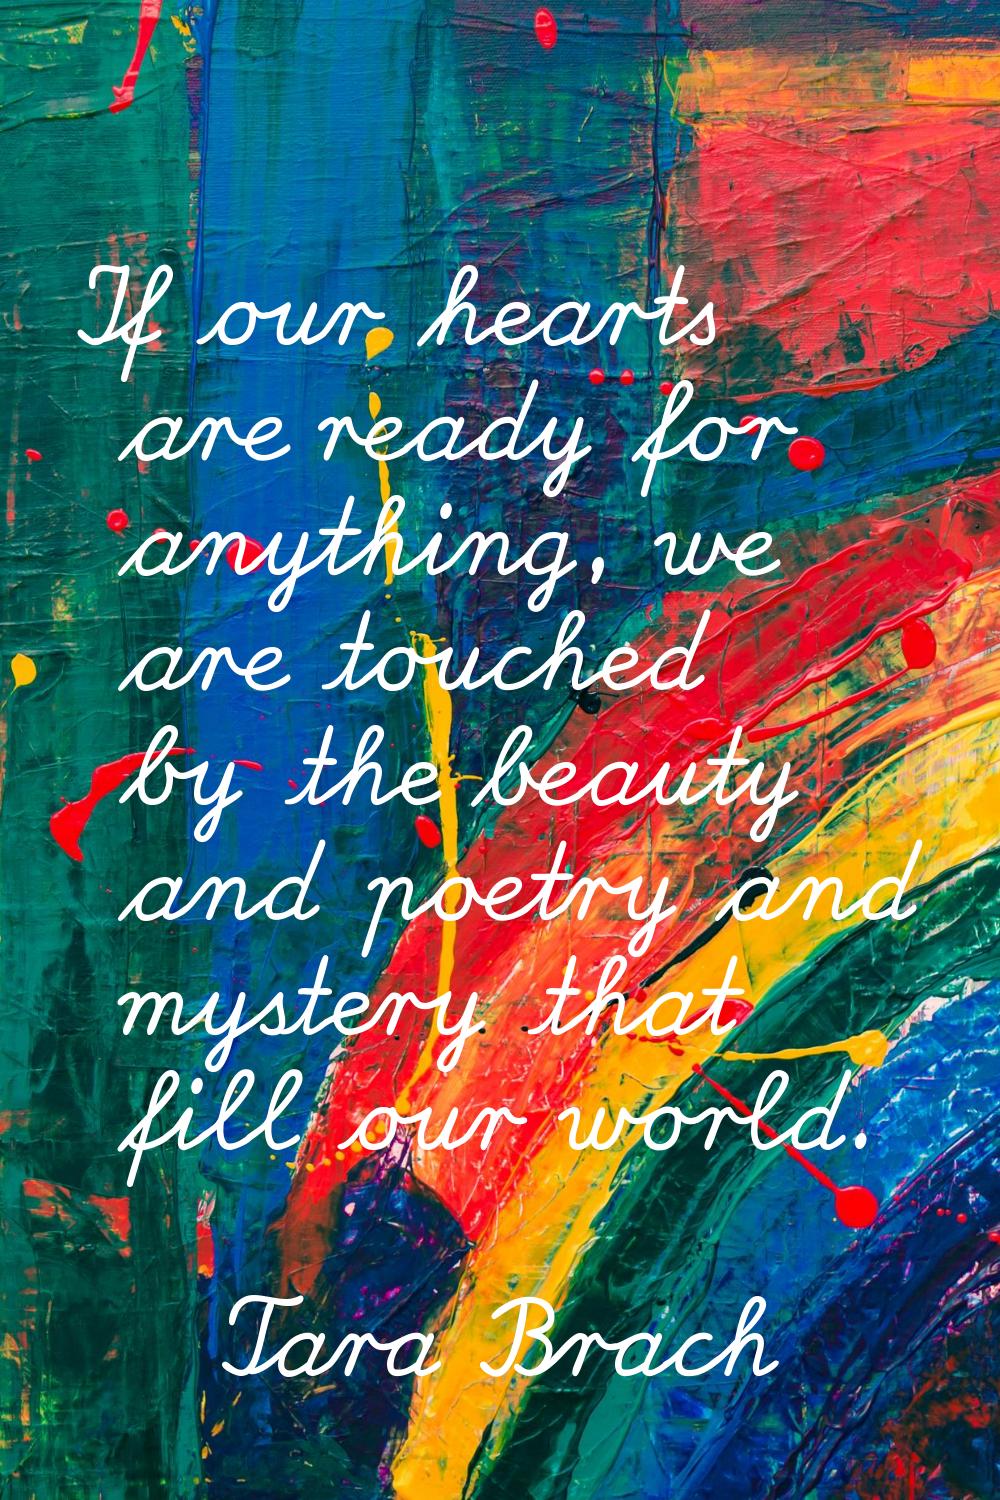 If our hearts are ready for anything, we are touched by the beauty and poetry and mystery that fill